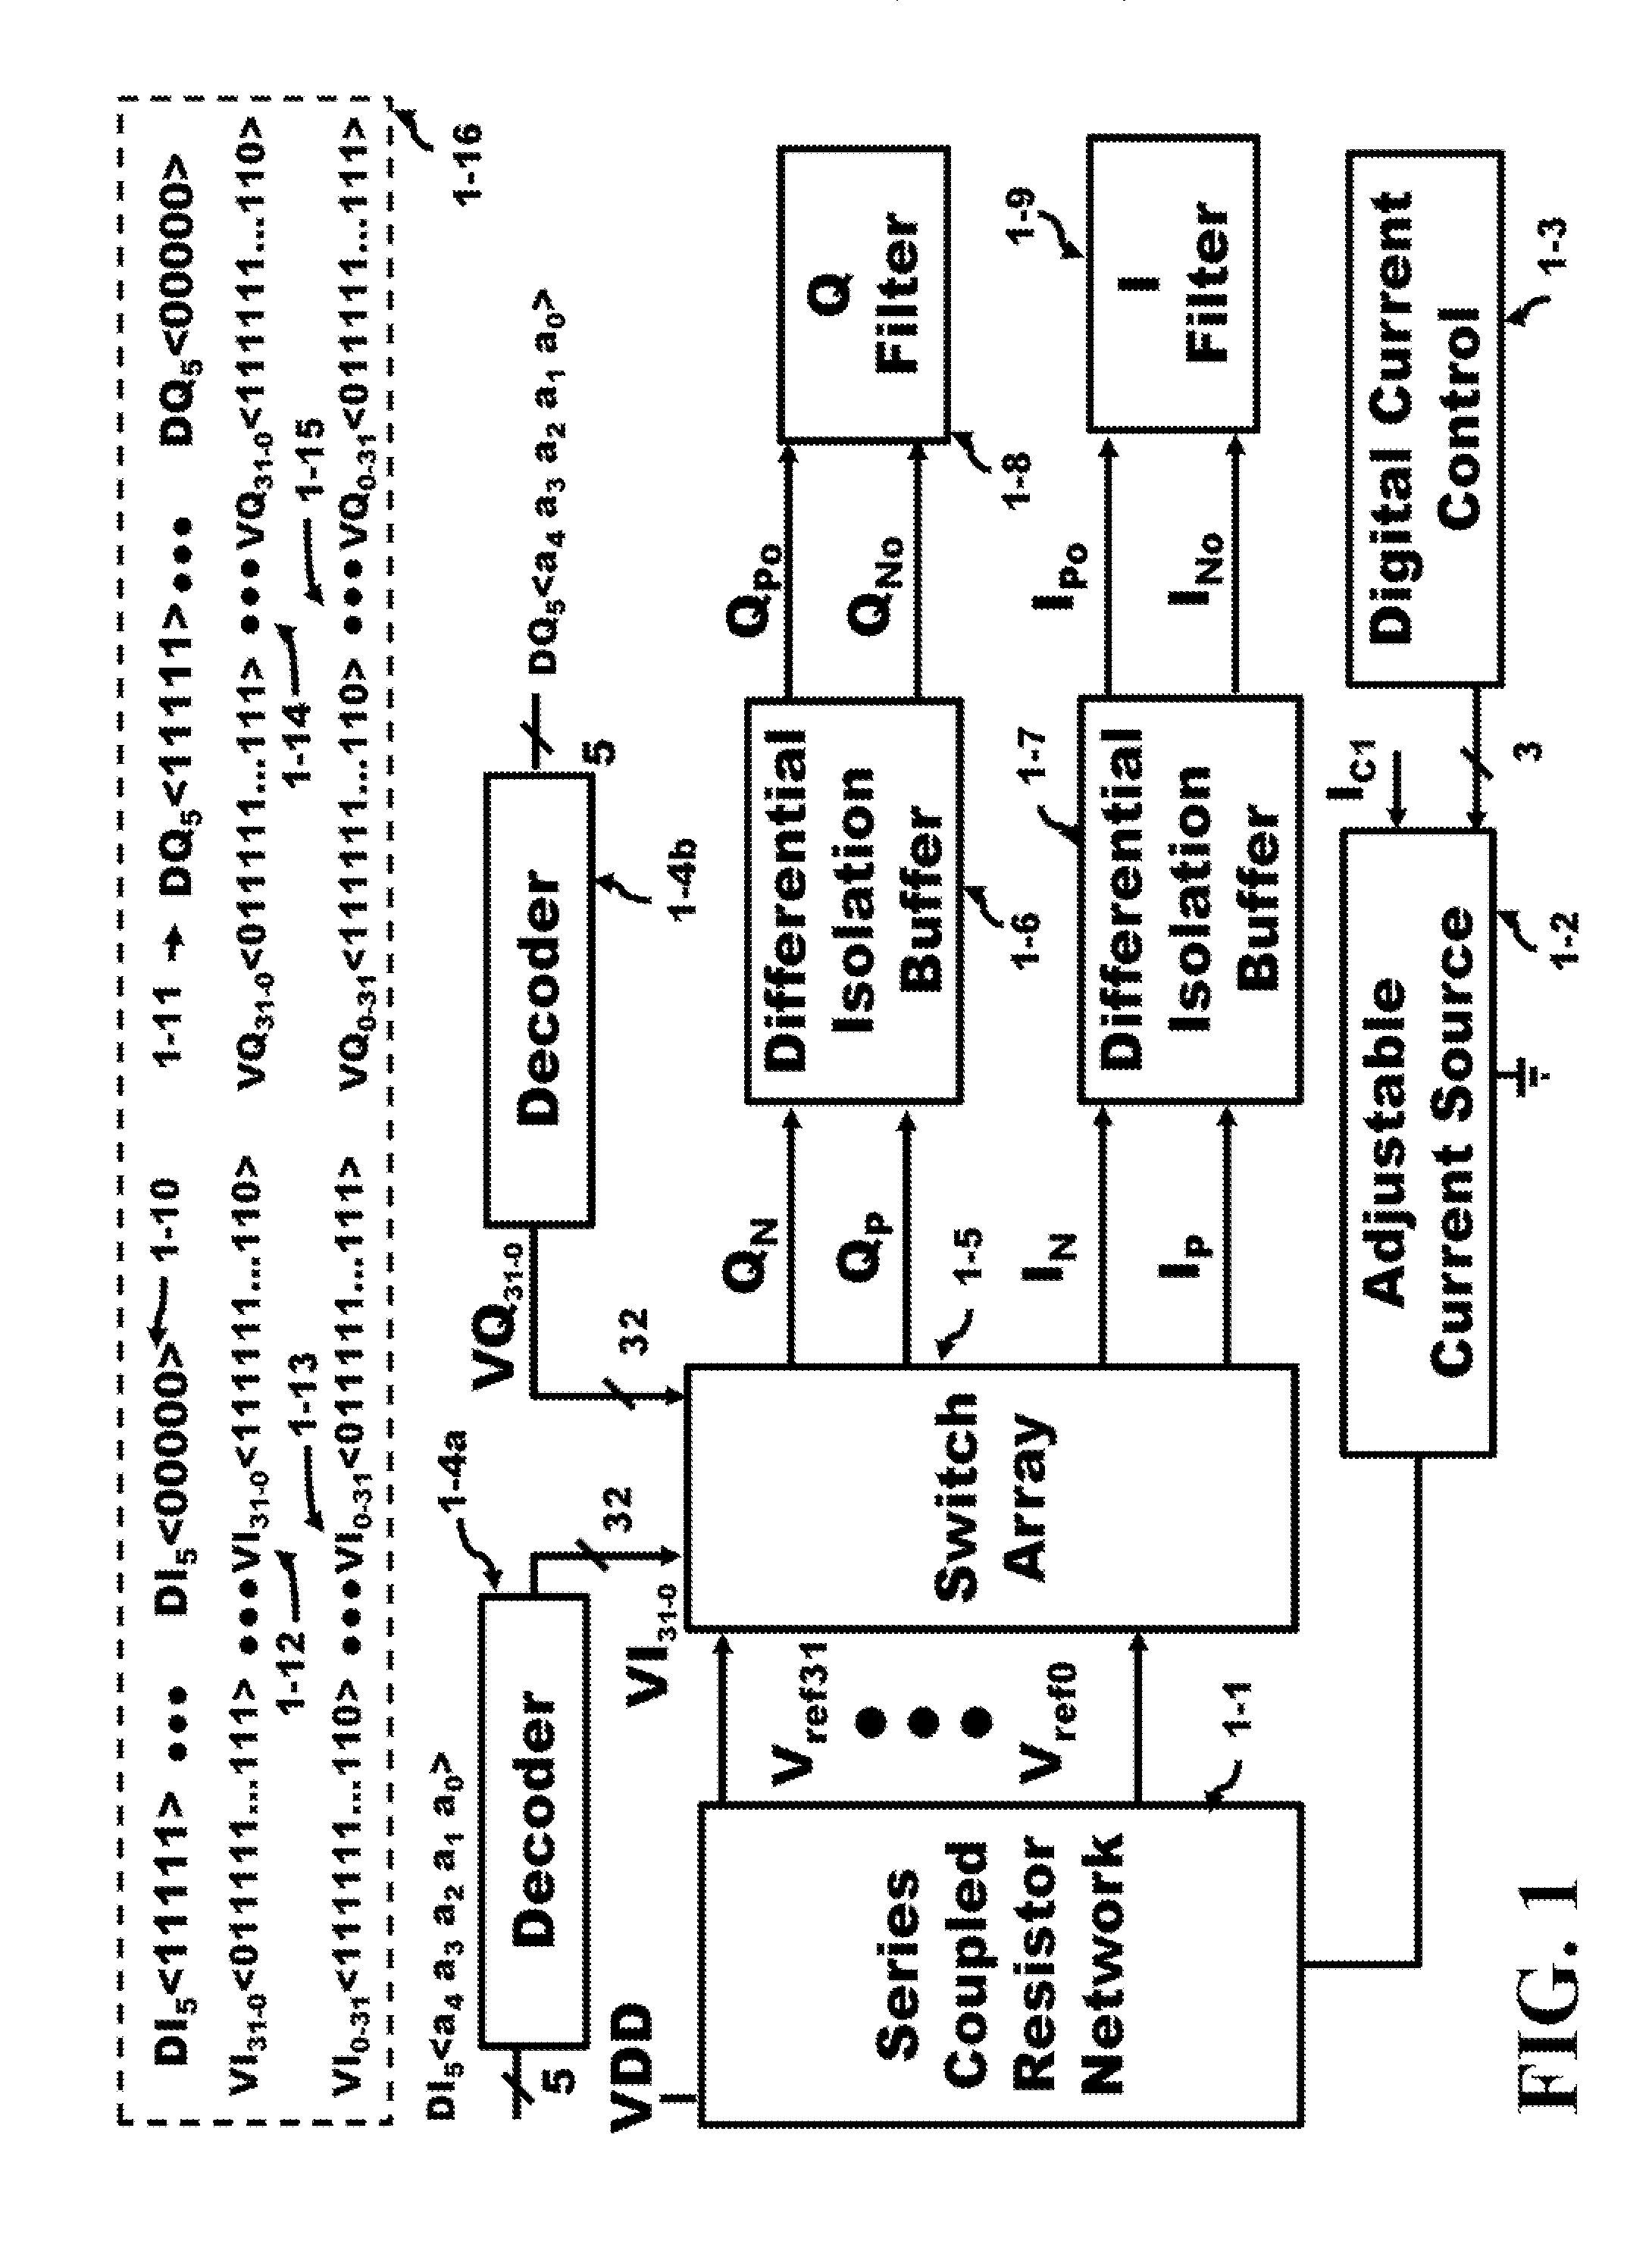 Method and Apparatus for Improving the Performance of a DAC Switch Array